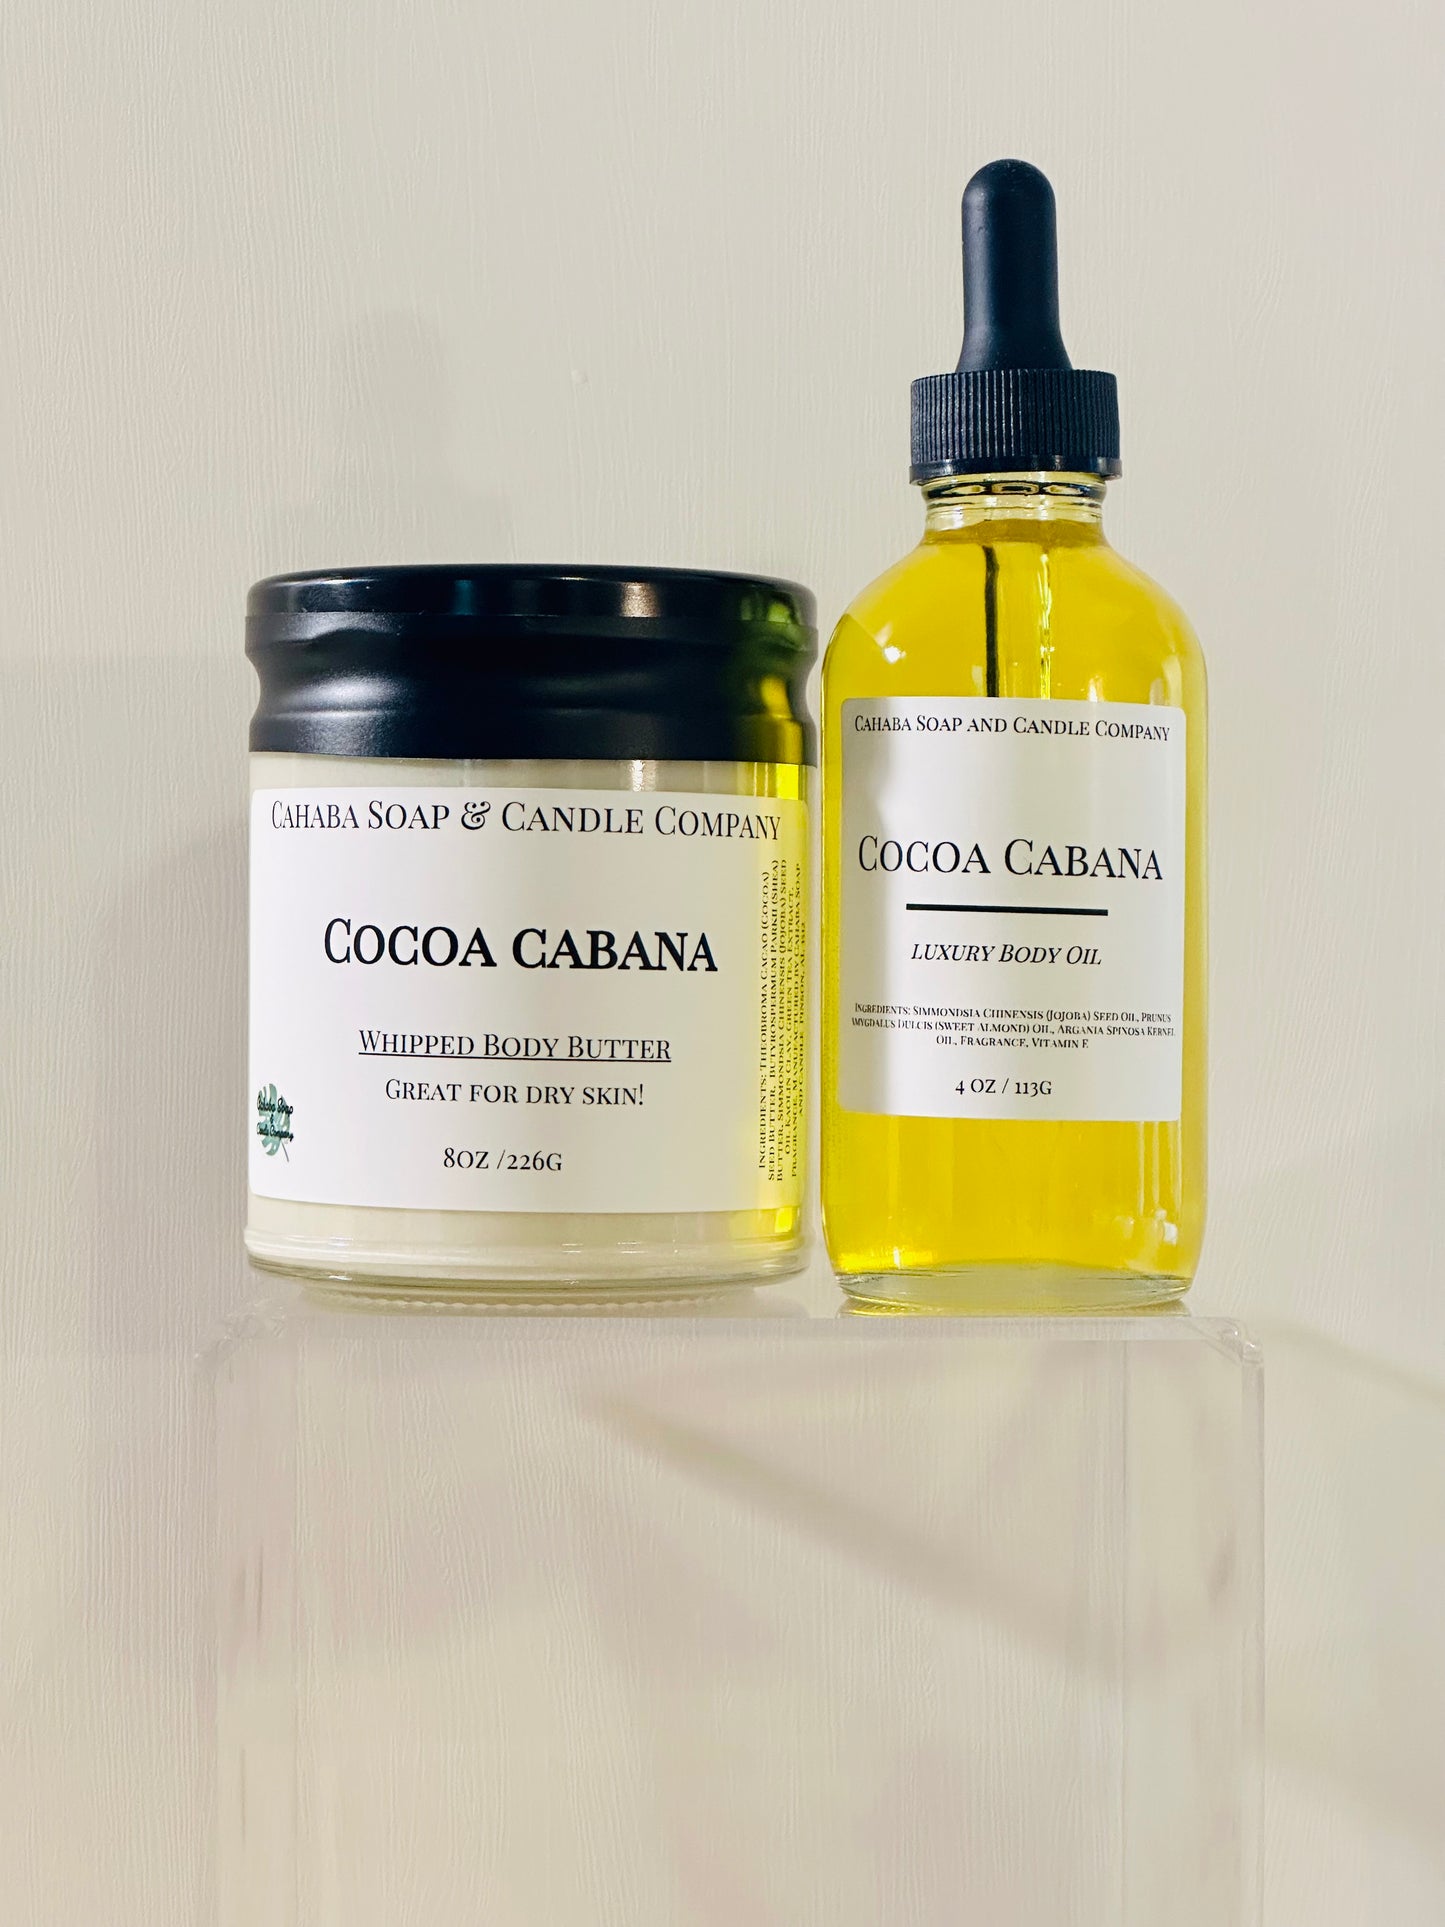 Cocoa Cabana Body Butter + Oil Combo - Cahaba Soap and Candle Company